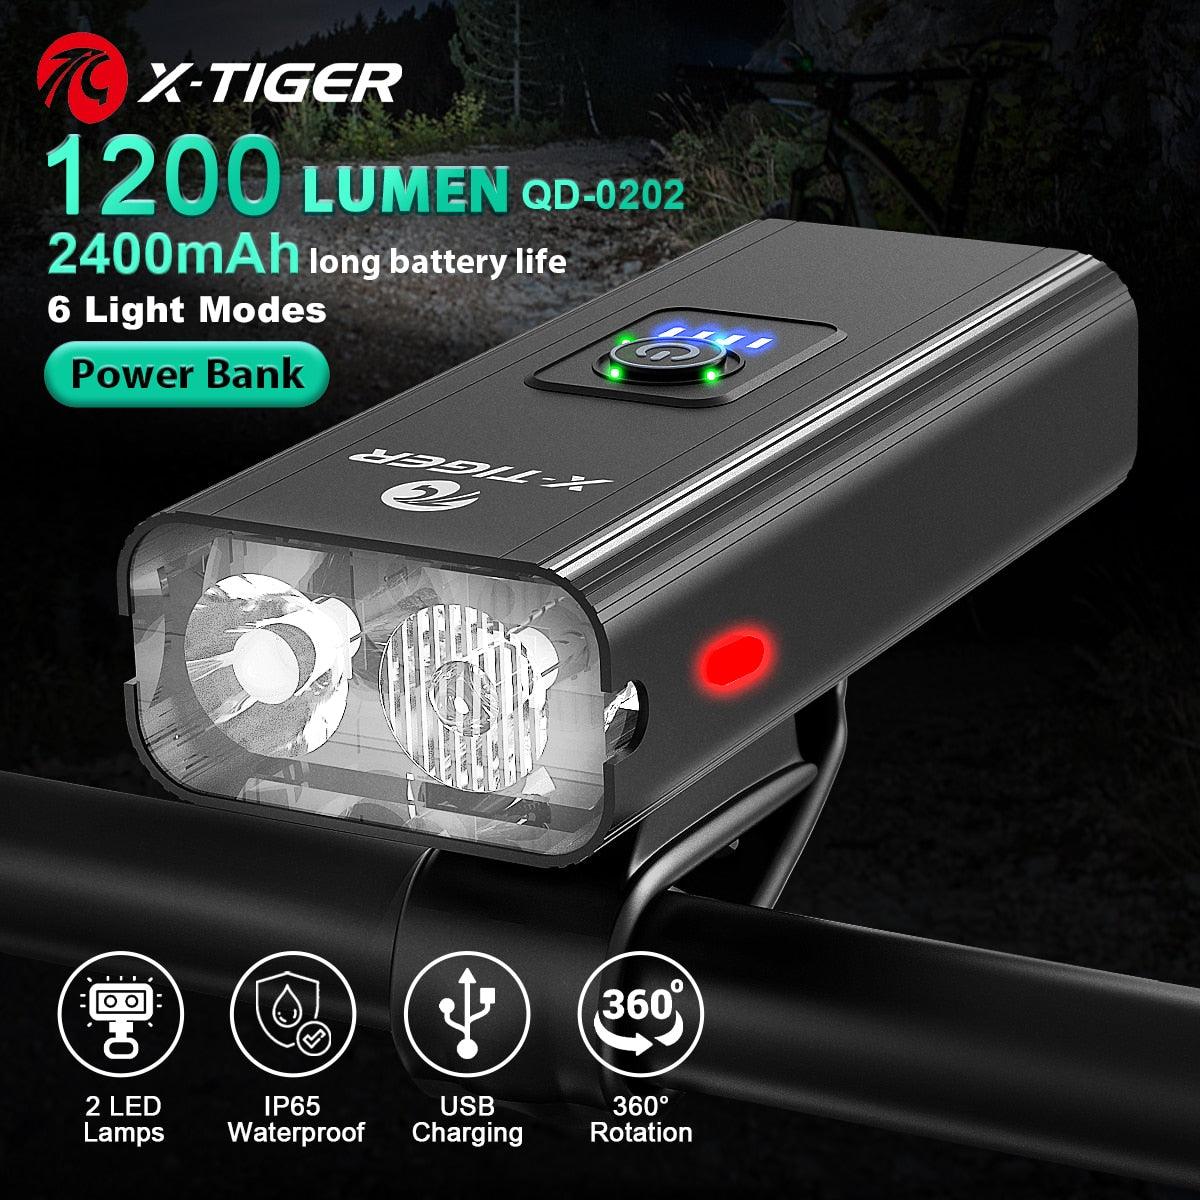 X-Tiger Bike Light Headlight Bicycle Lamp With Power Bank Rechargeable LED 5200mAh MTB Bicycle Light Flashlight Bike Accessories - Pogo Cycles